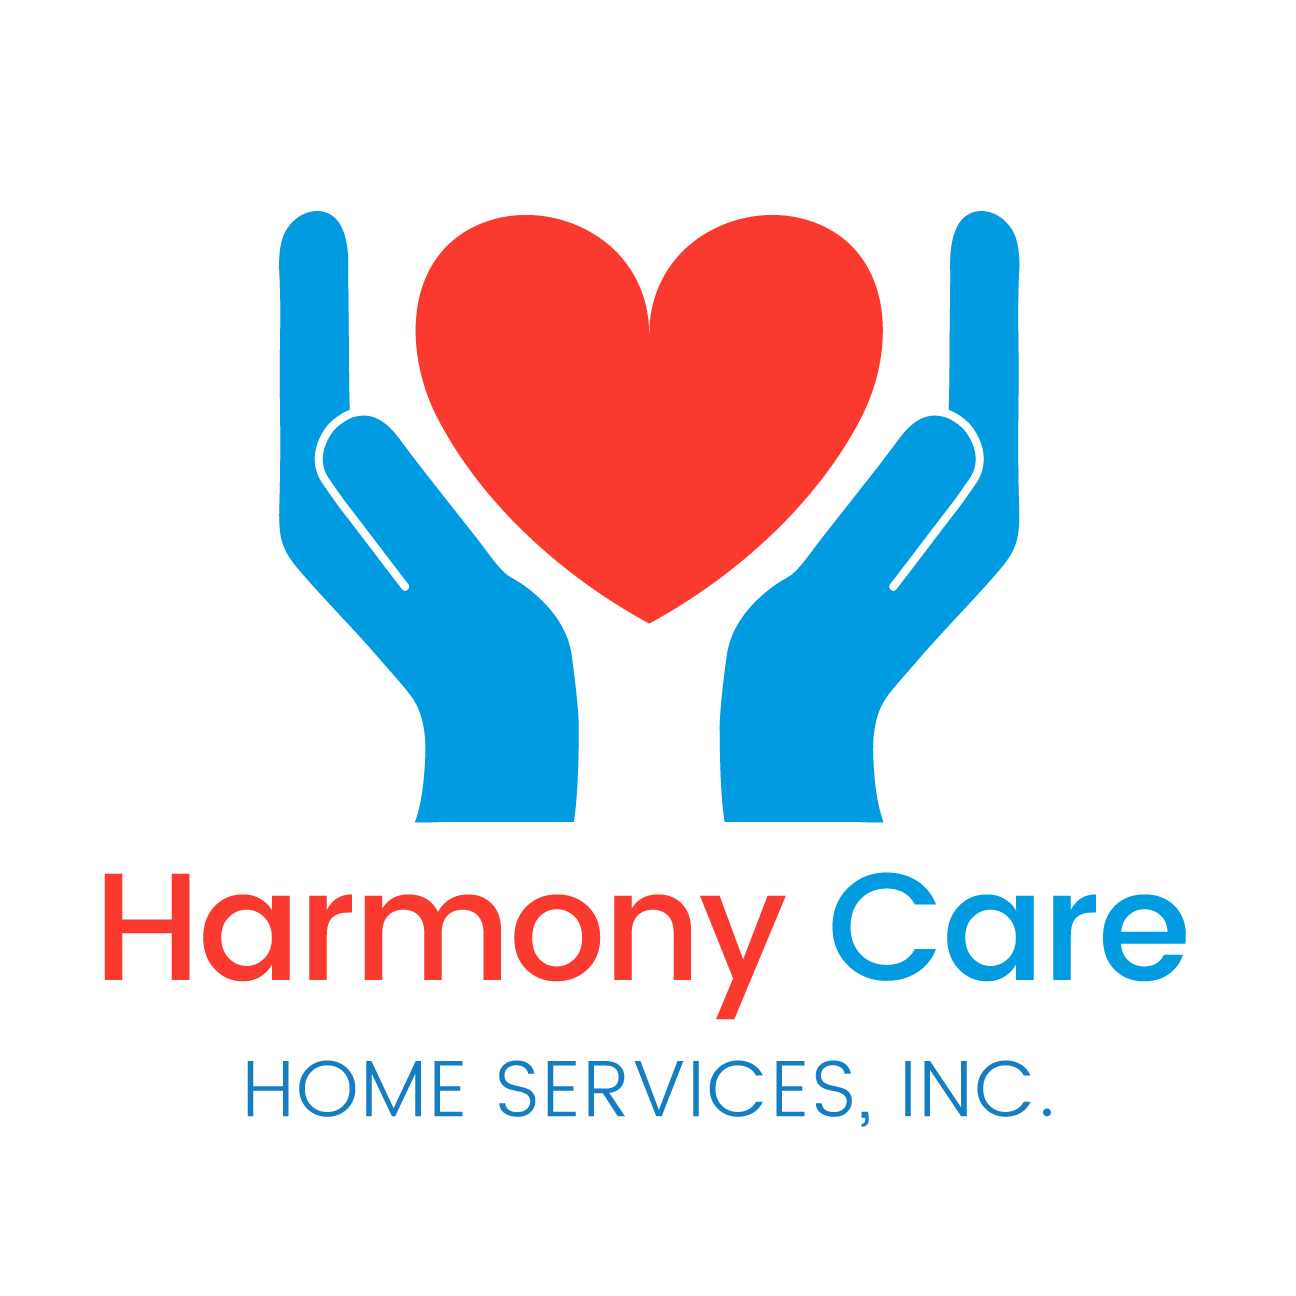 Harmony Care Home Services, Inc.